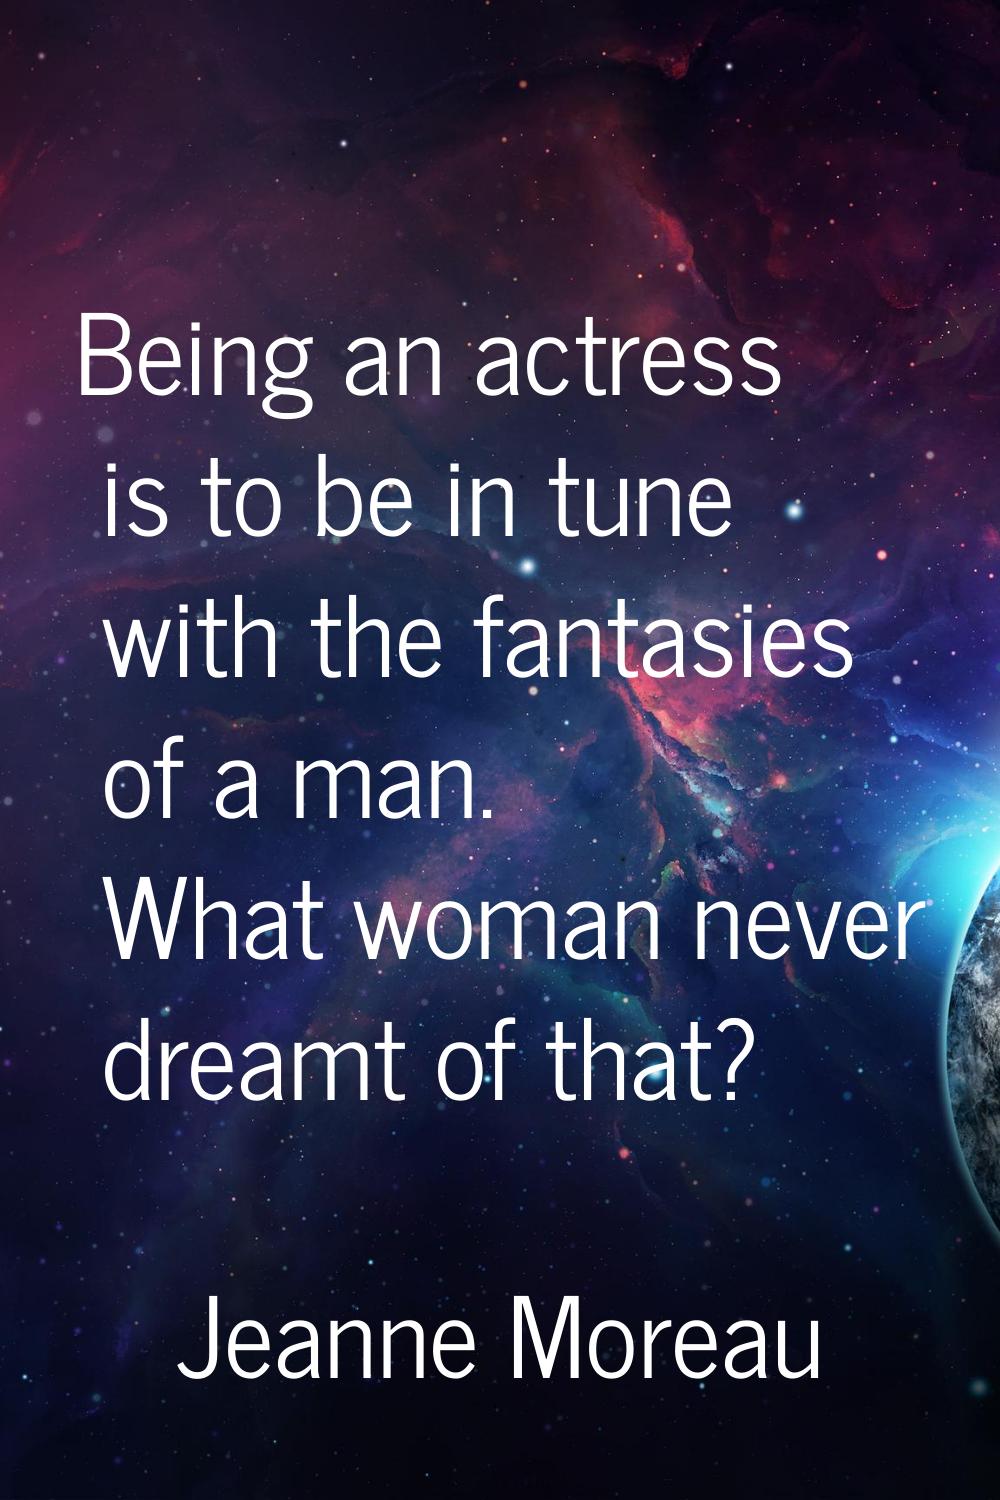 Being an actress is to be in tune with the fantasies of a man. What woman never dreamt of that?